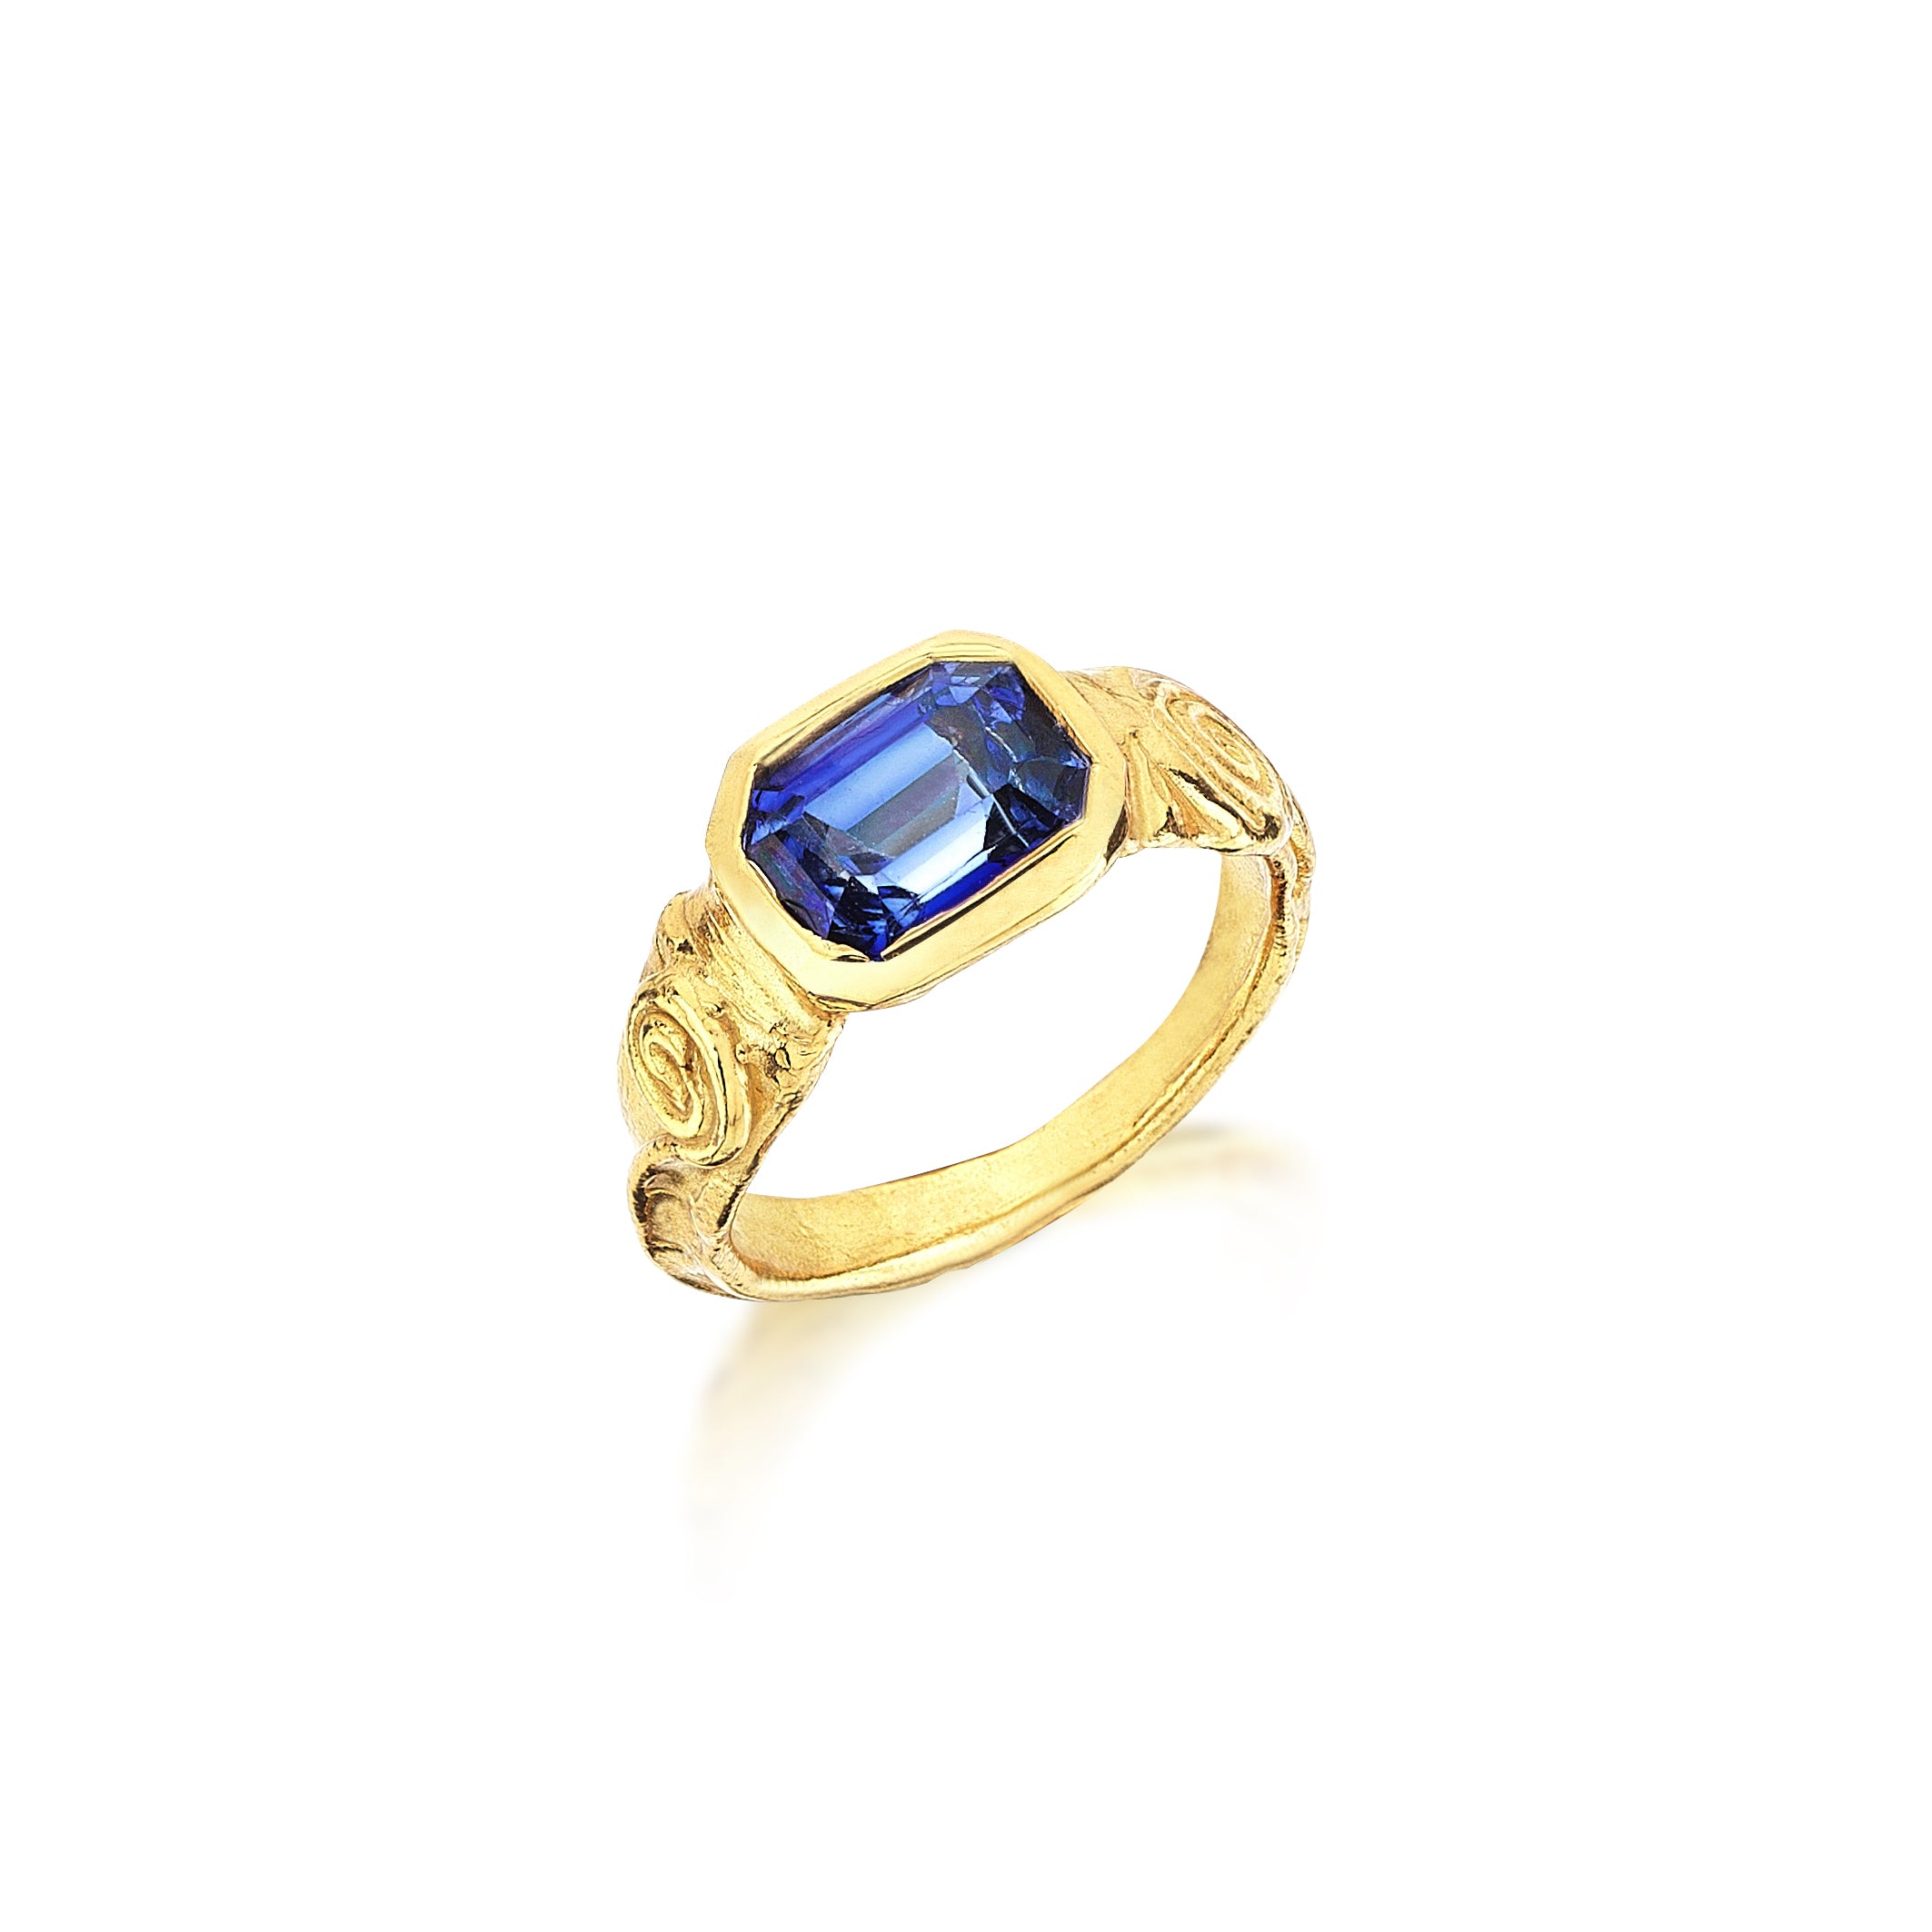 The Spiral Sapphire Ring